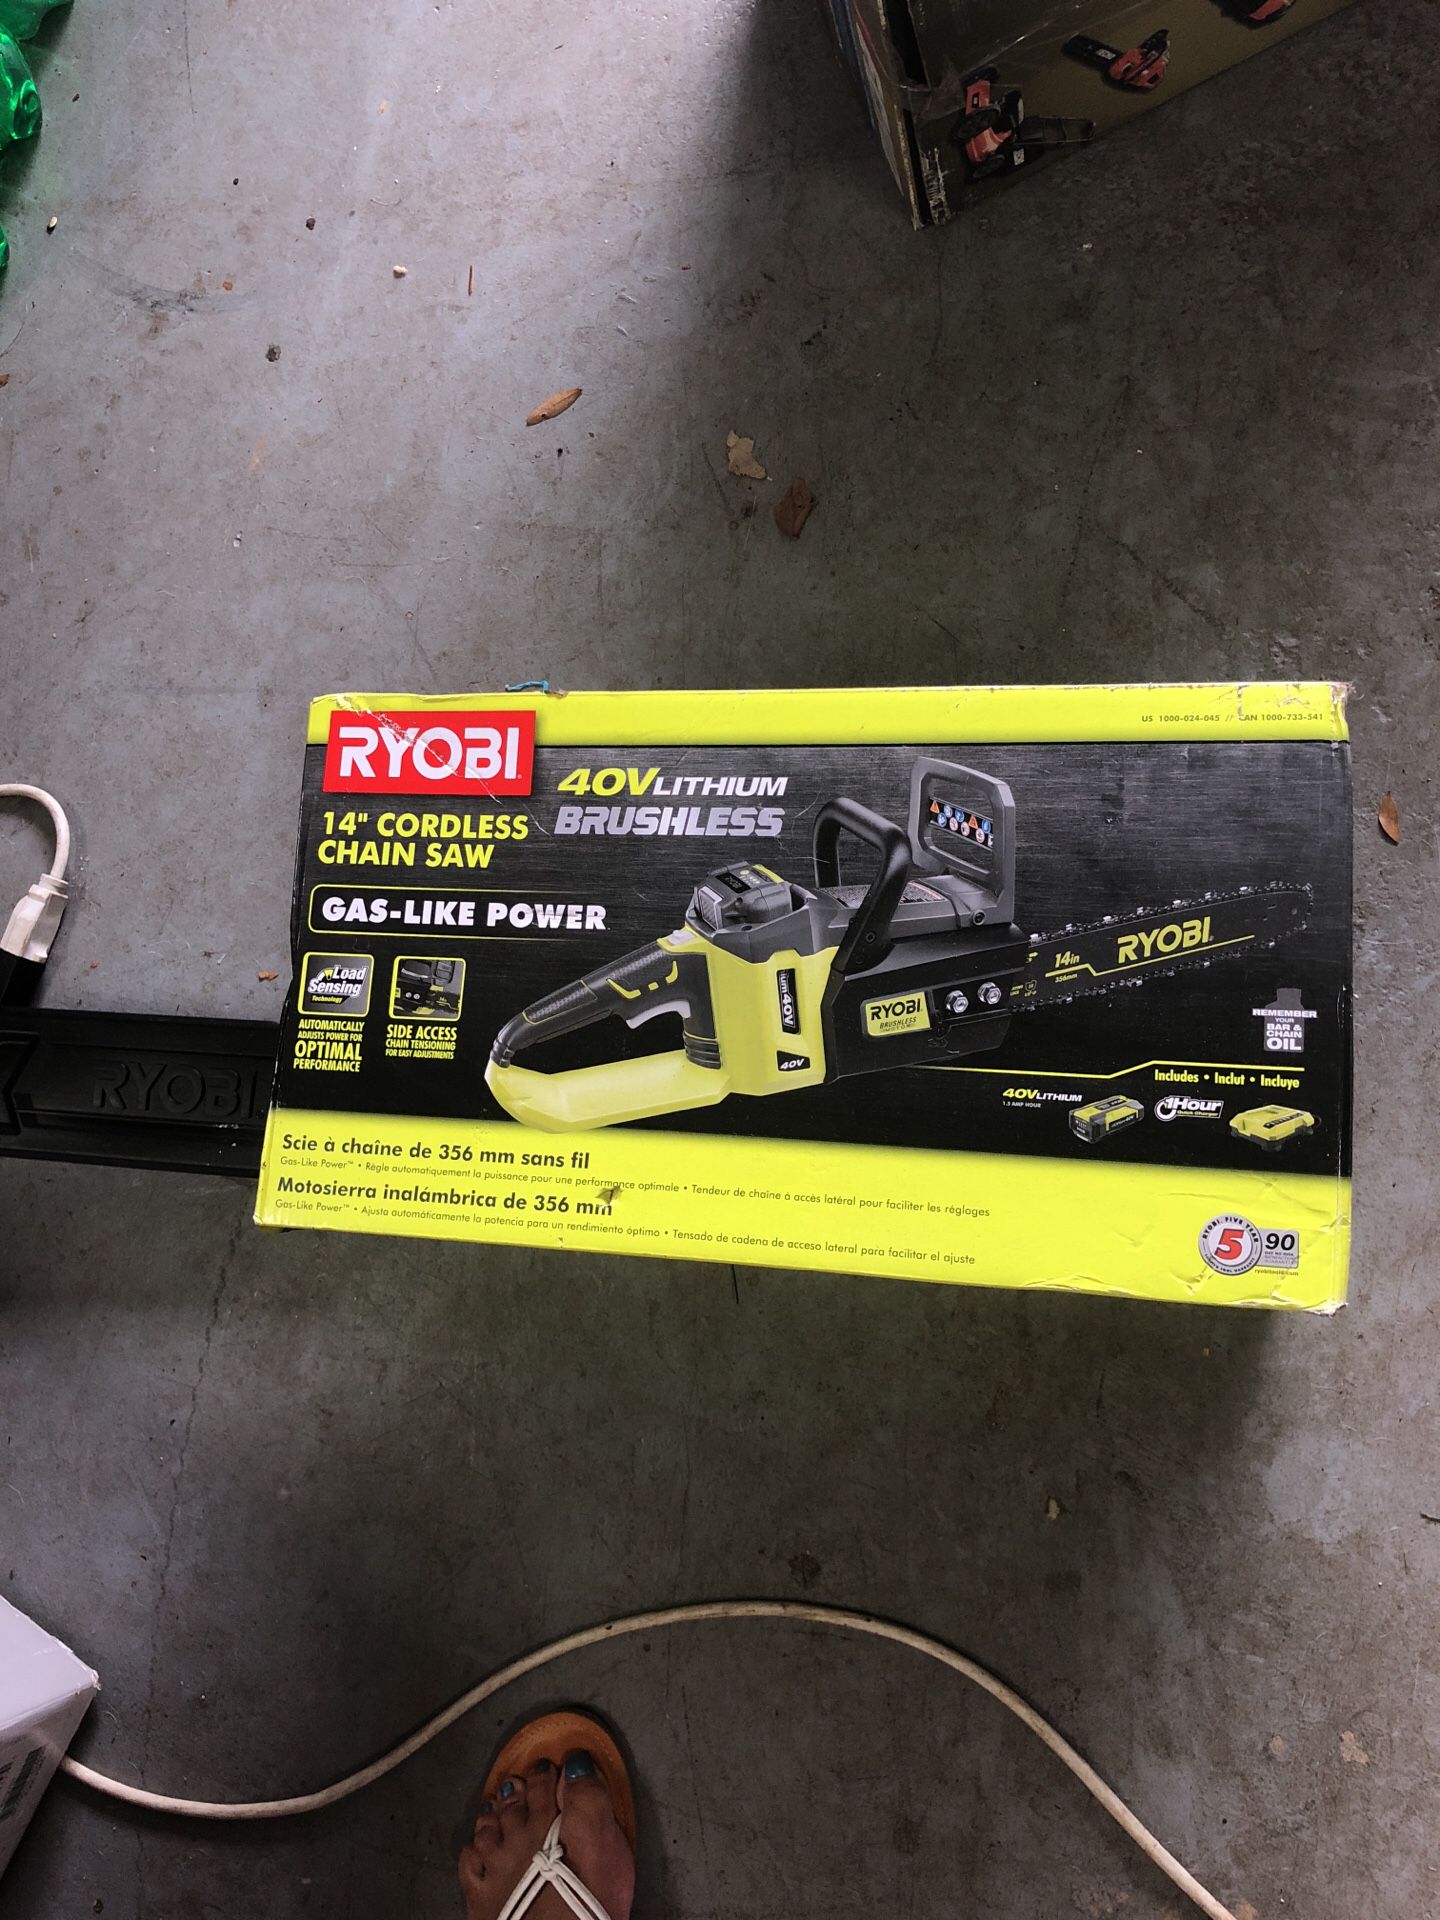 RYOBI 14 inch cordless chainsaw 40 V lithium brushless gas like power comes with 40 V lithium battery and charger